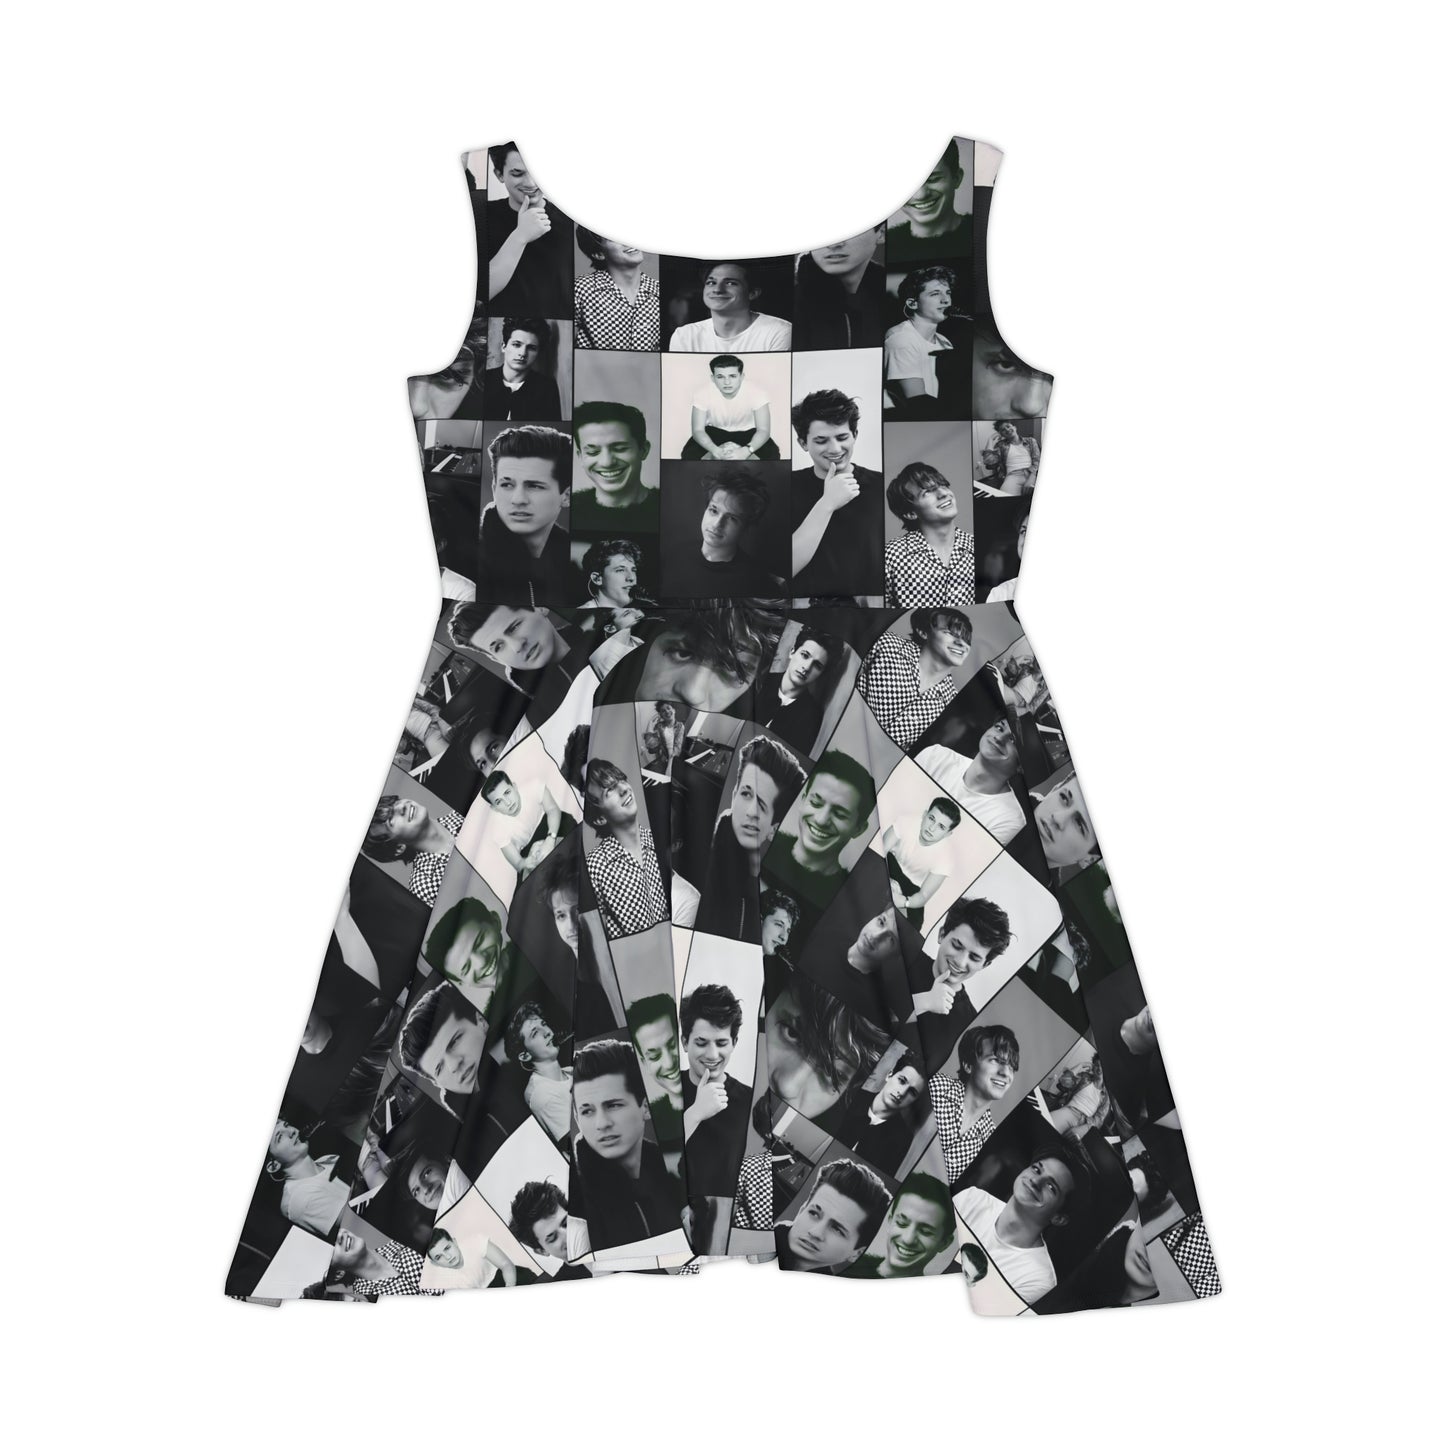 Charlie Puth Black And White Portraits Collage Women's Skater Dress